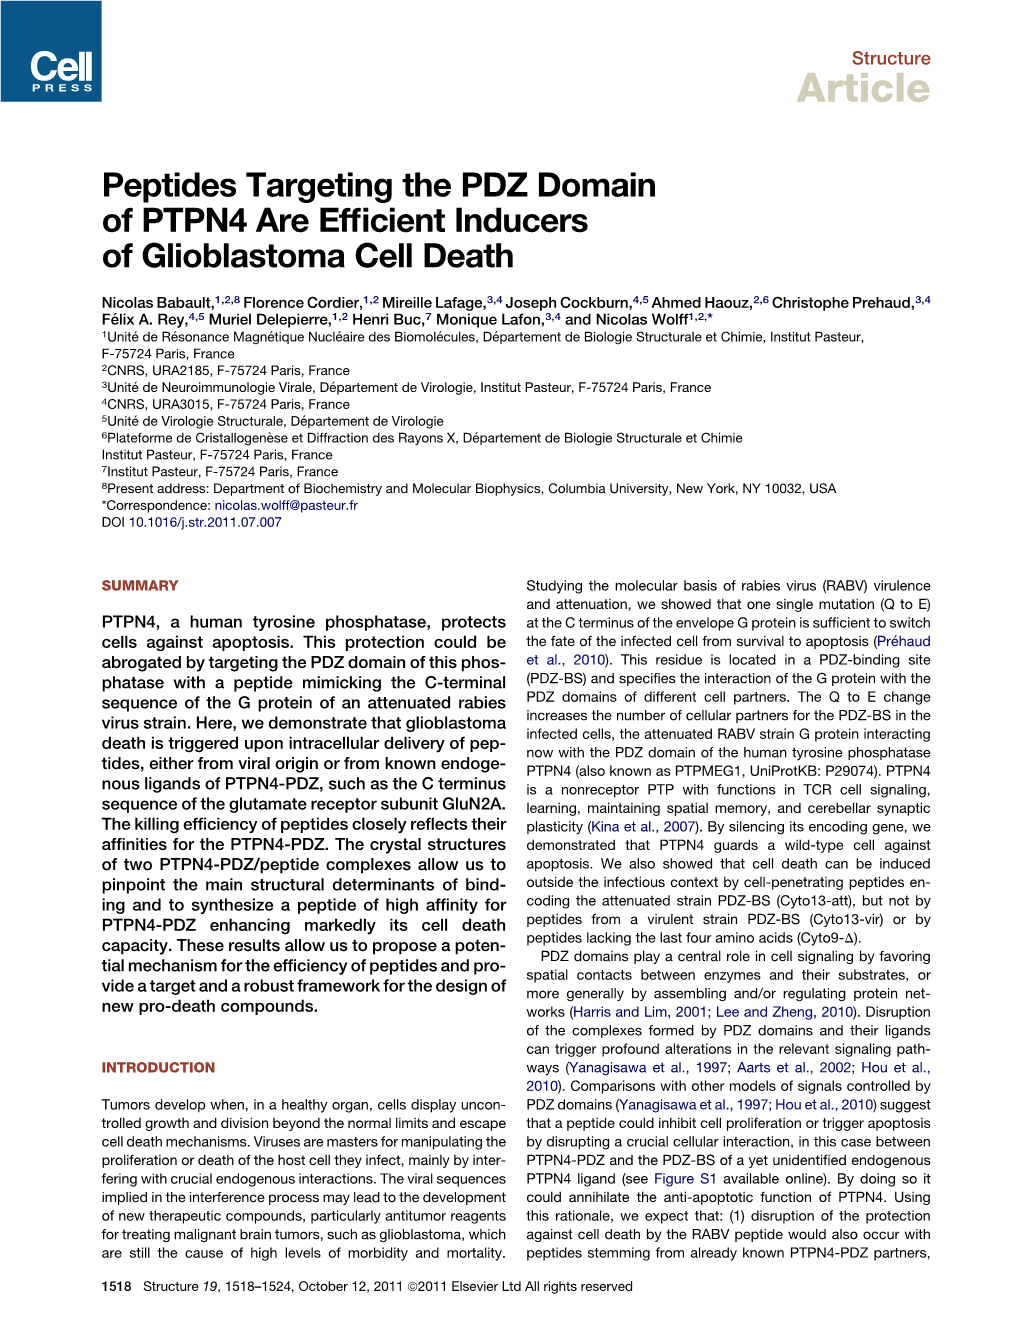 Peptides Targeting the PDZ Domain of PTPN4 Are Efficient Inducers of Glioblastoma Cell Death